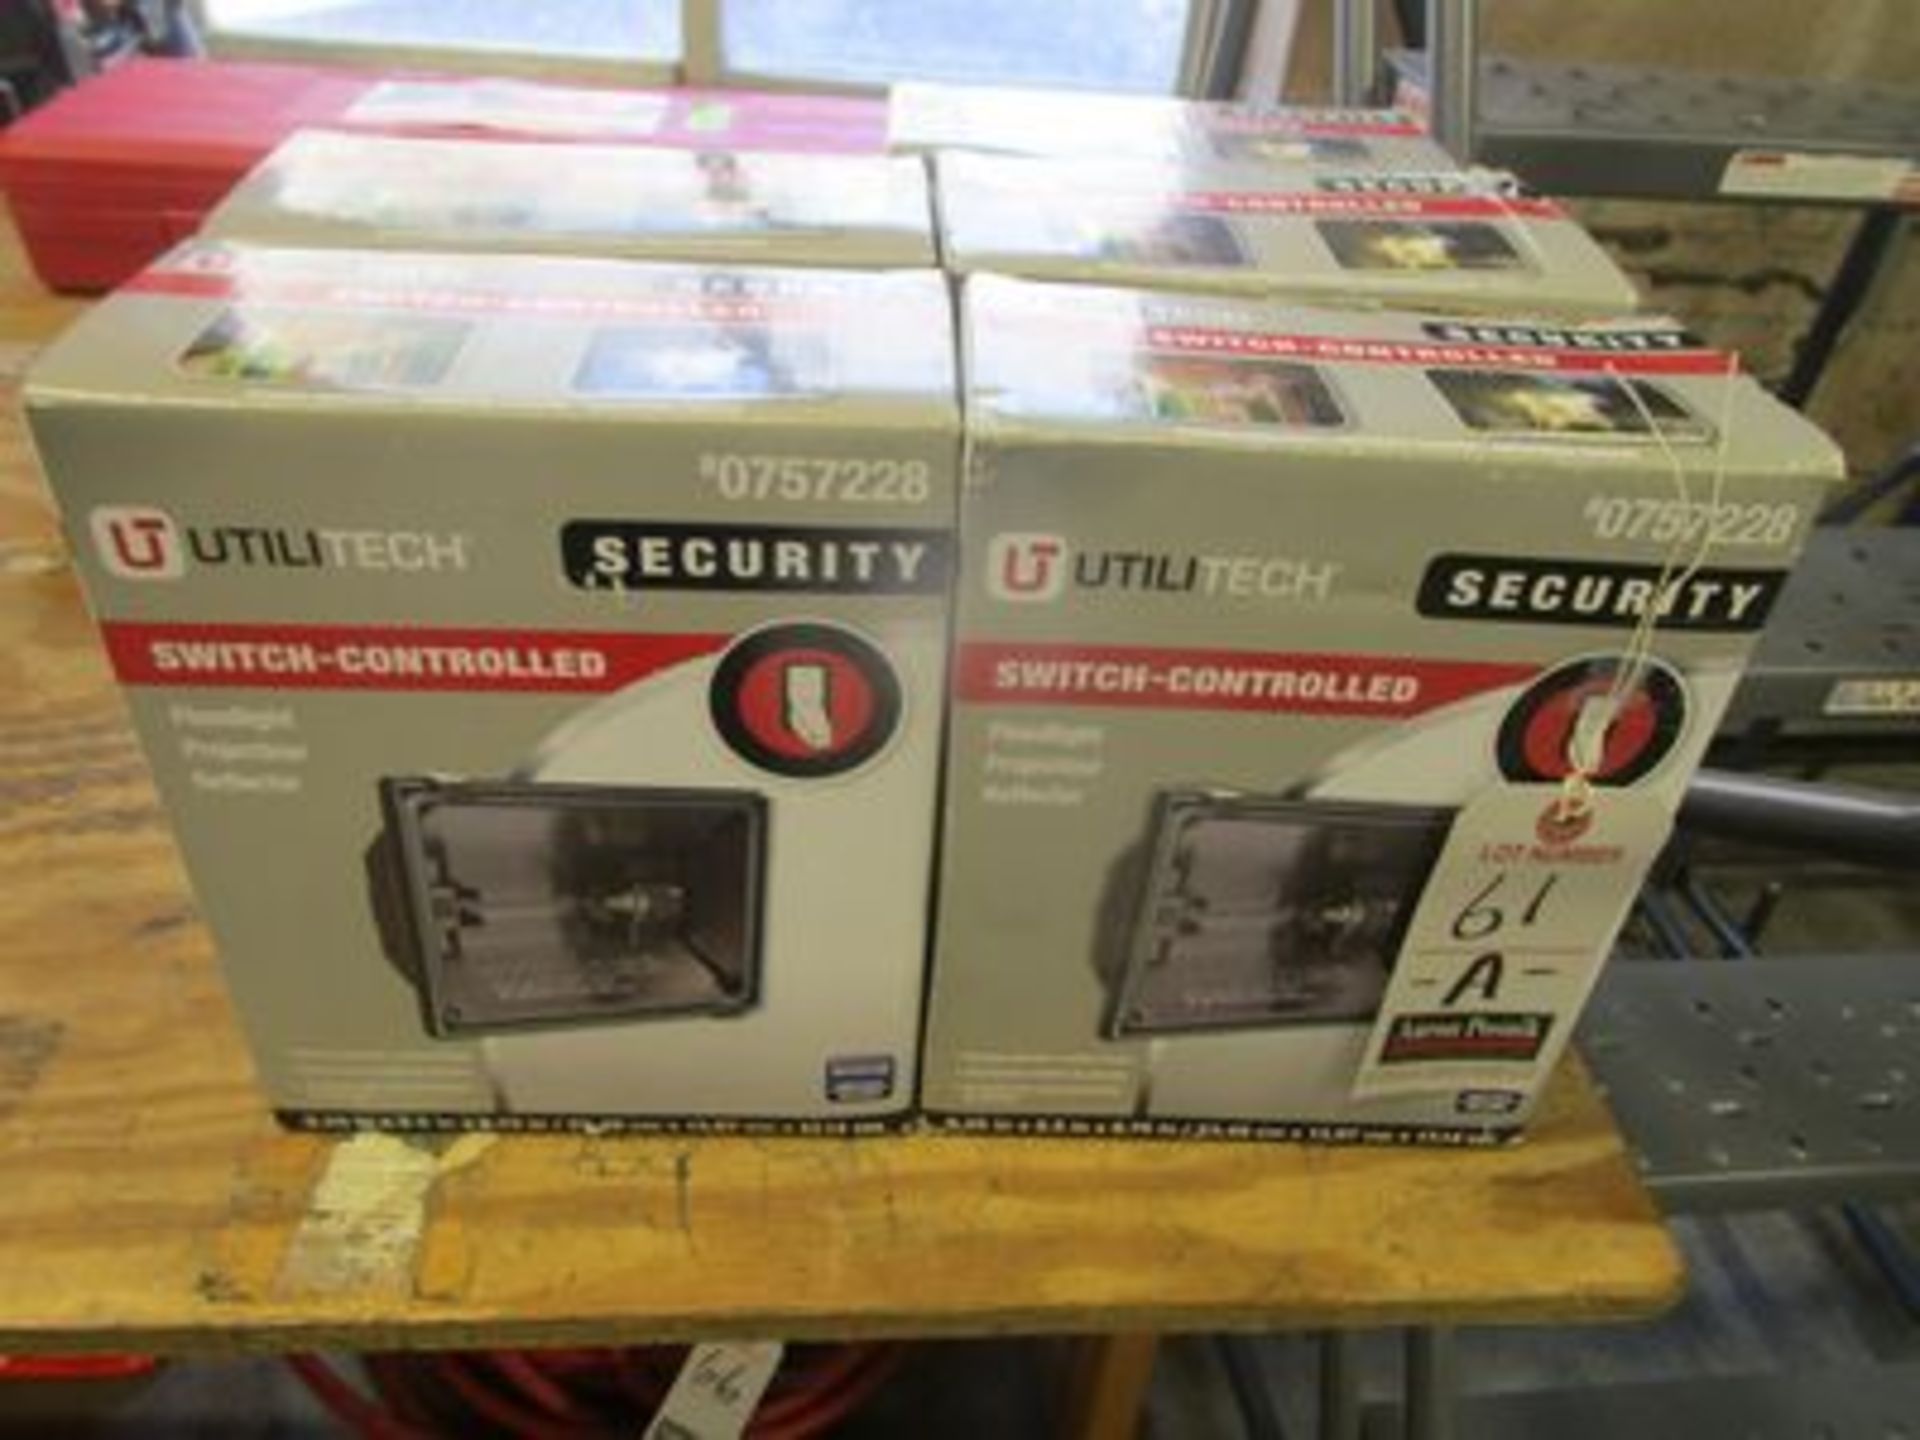 UTILITECH SWITCH-CONTROLLED SECURITY FLOOD LIGHTS